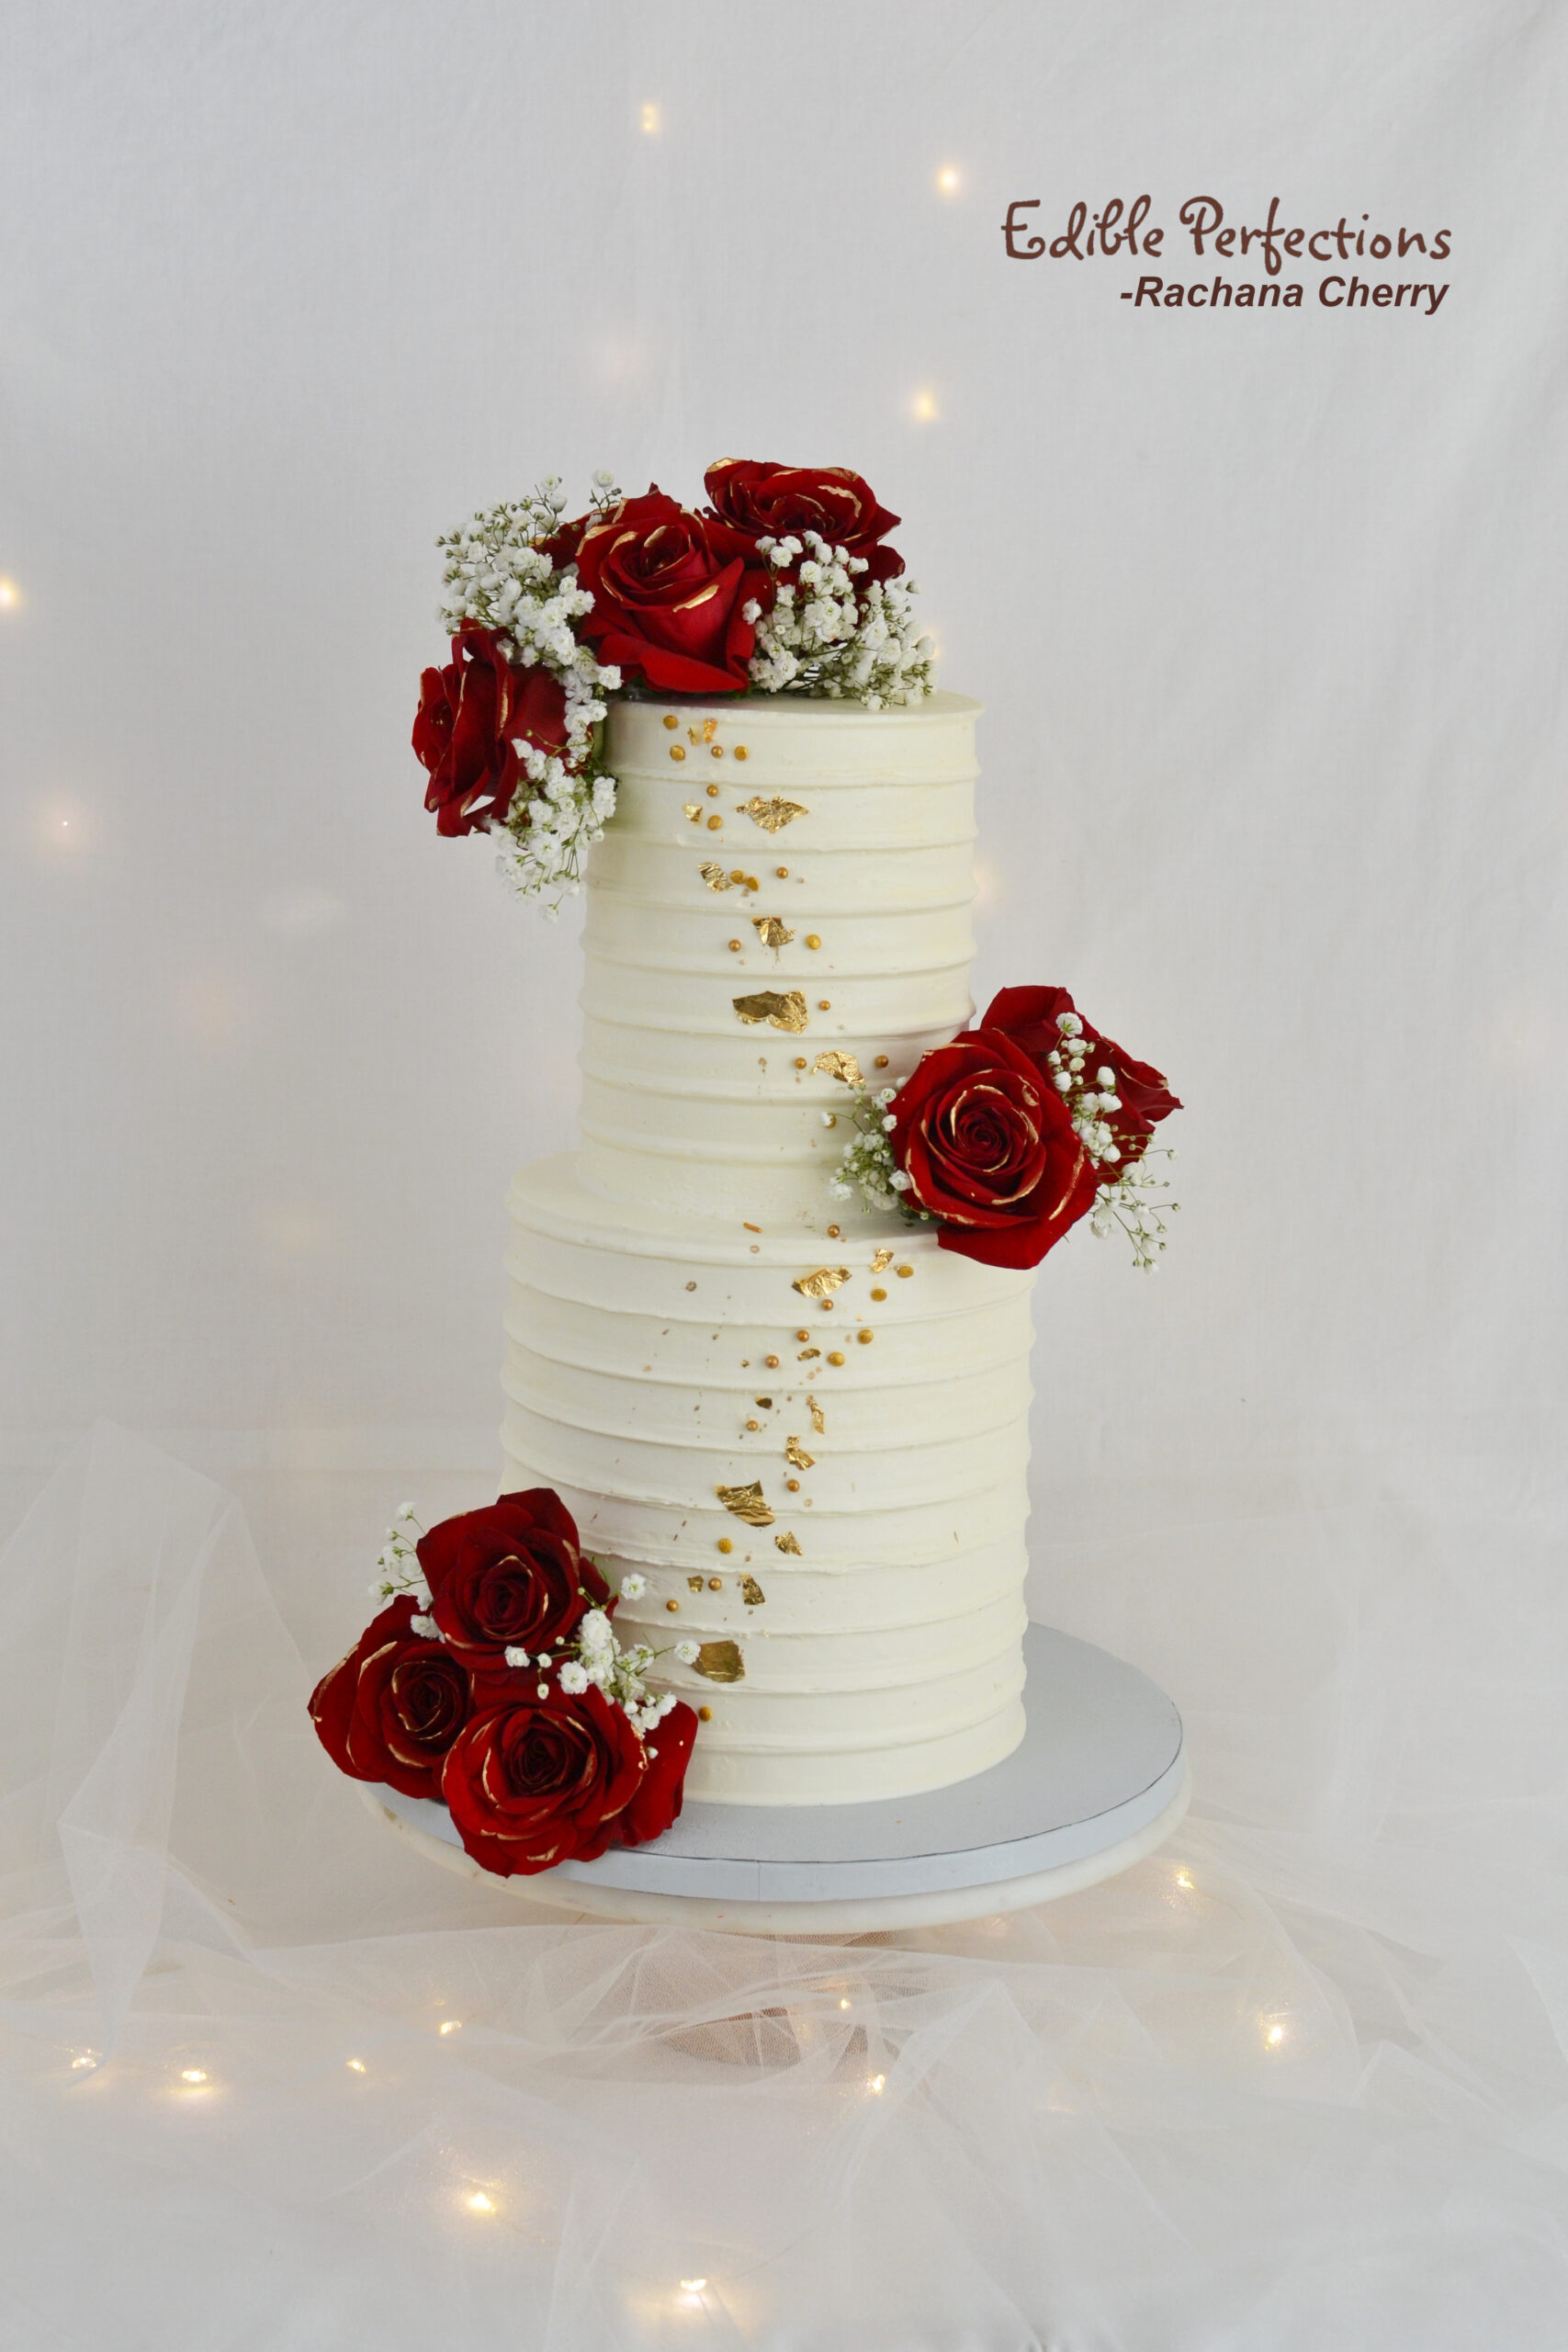 How to Use Fresh Flowers in Cake Decorating